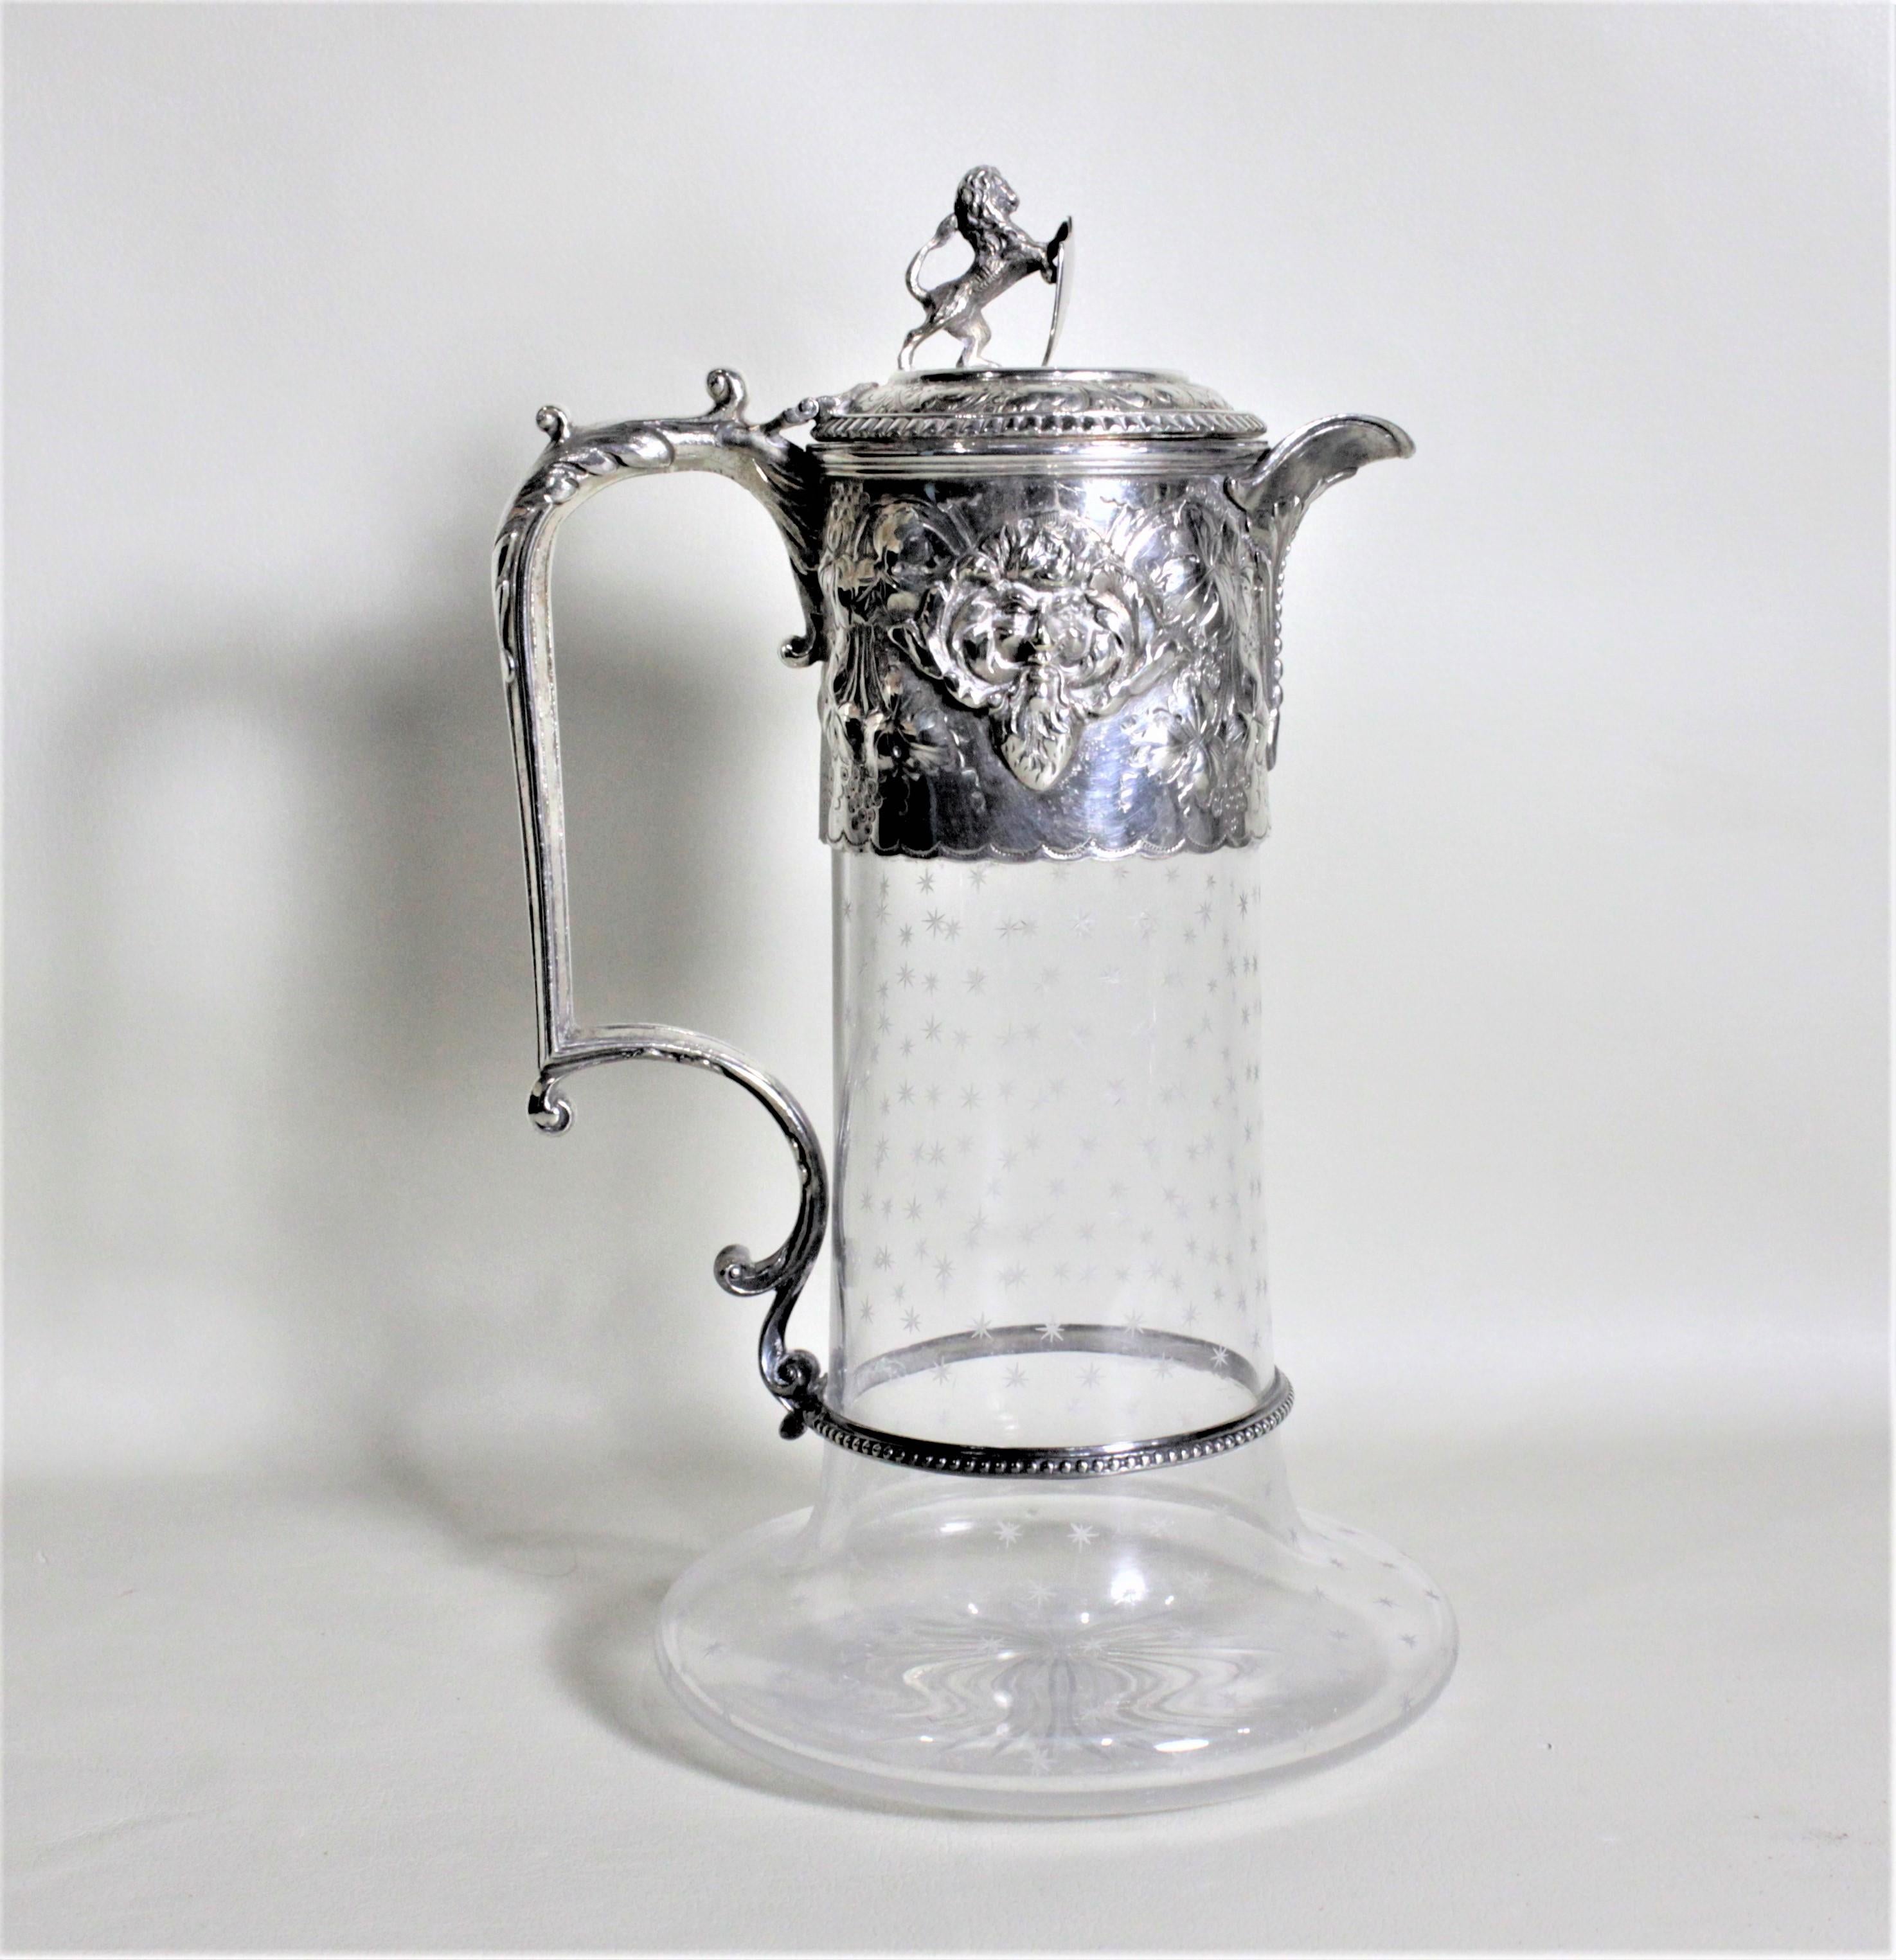 Cast Antique English Silver Plated and Cut Glass Claret Jug or Decanter For Sale